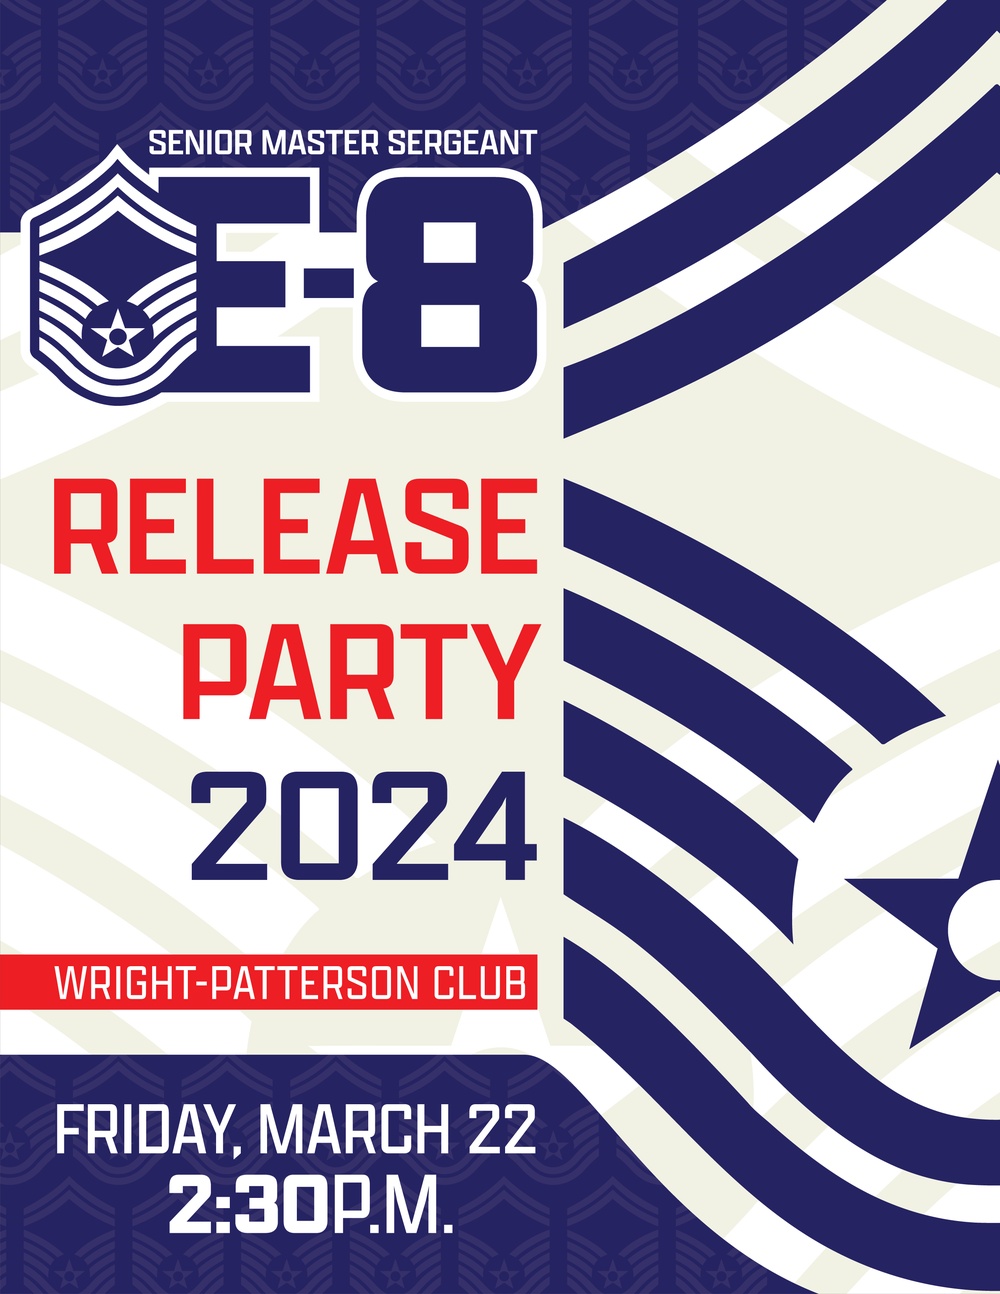 88th Air Base Wing: SMSgt Release Party 2024 Flyer